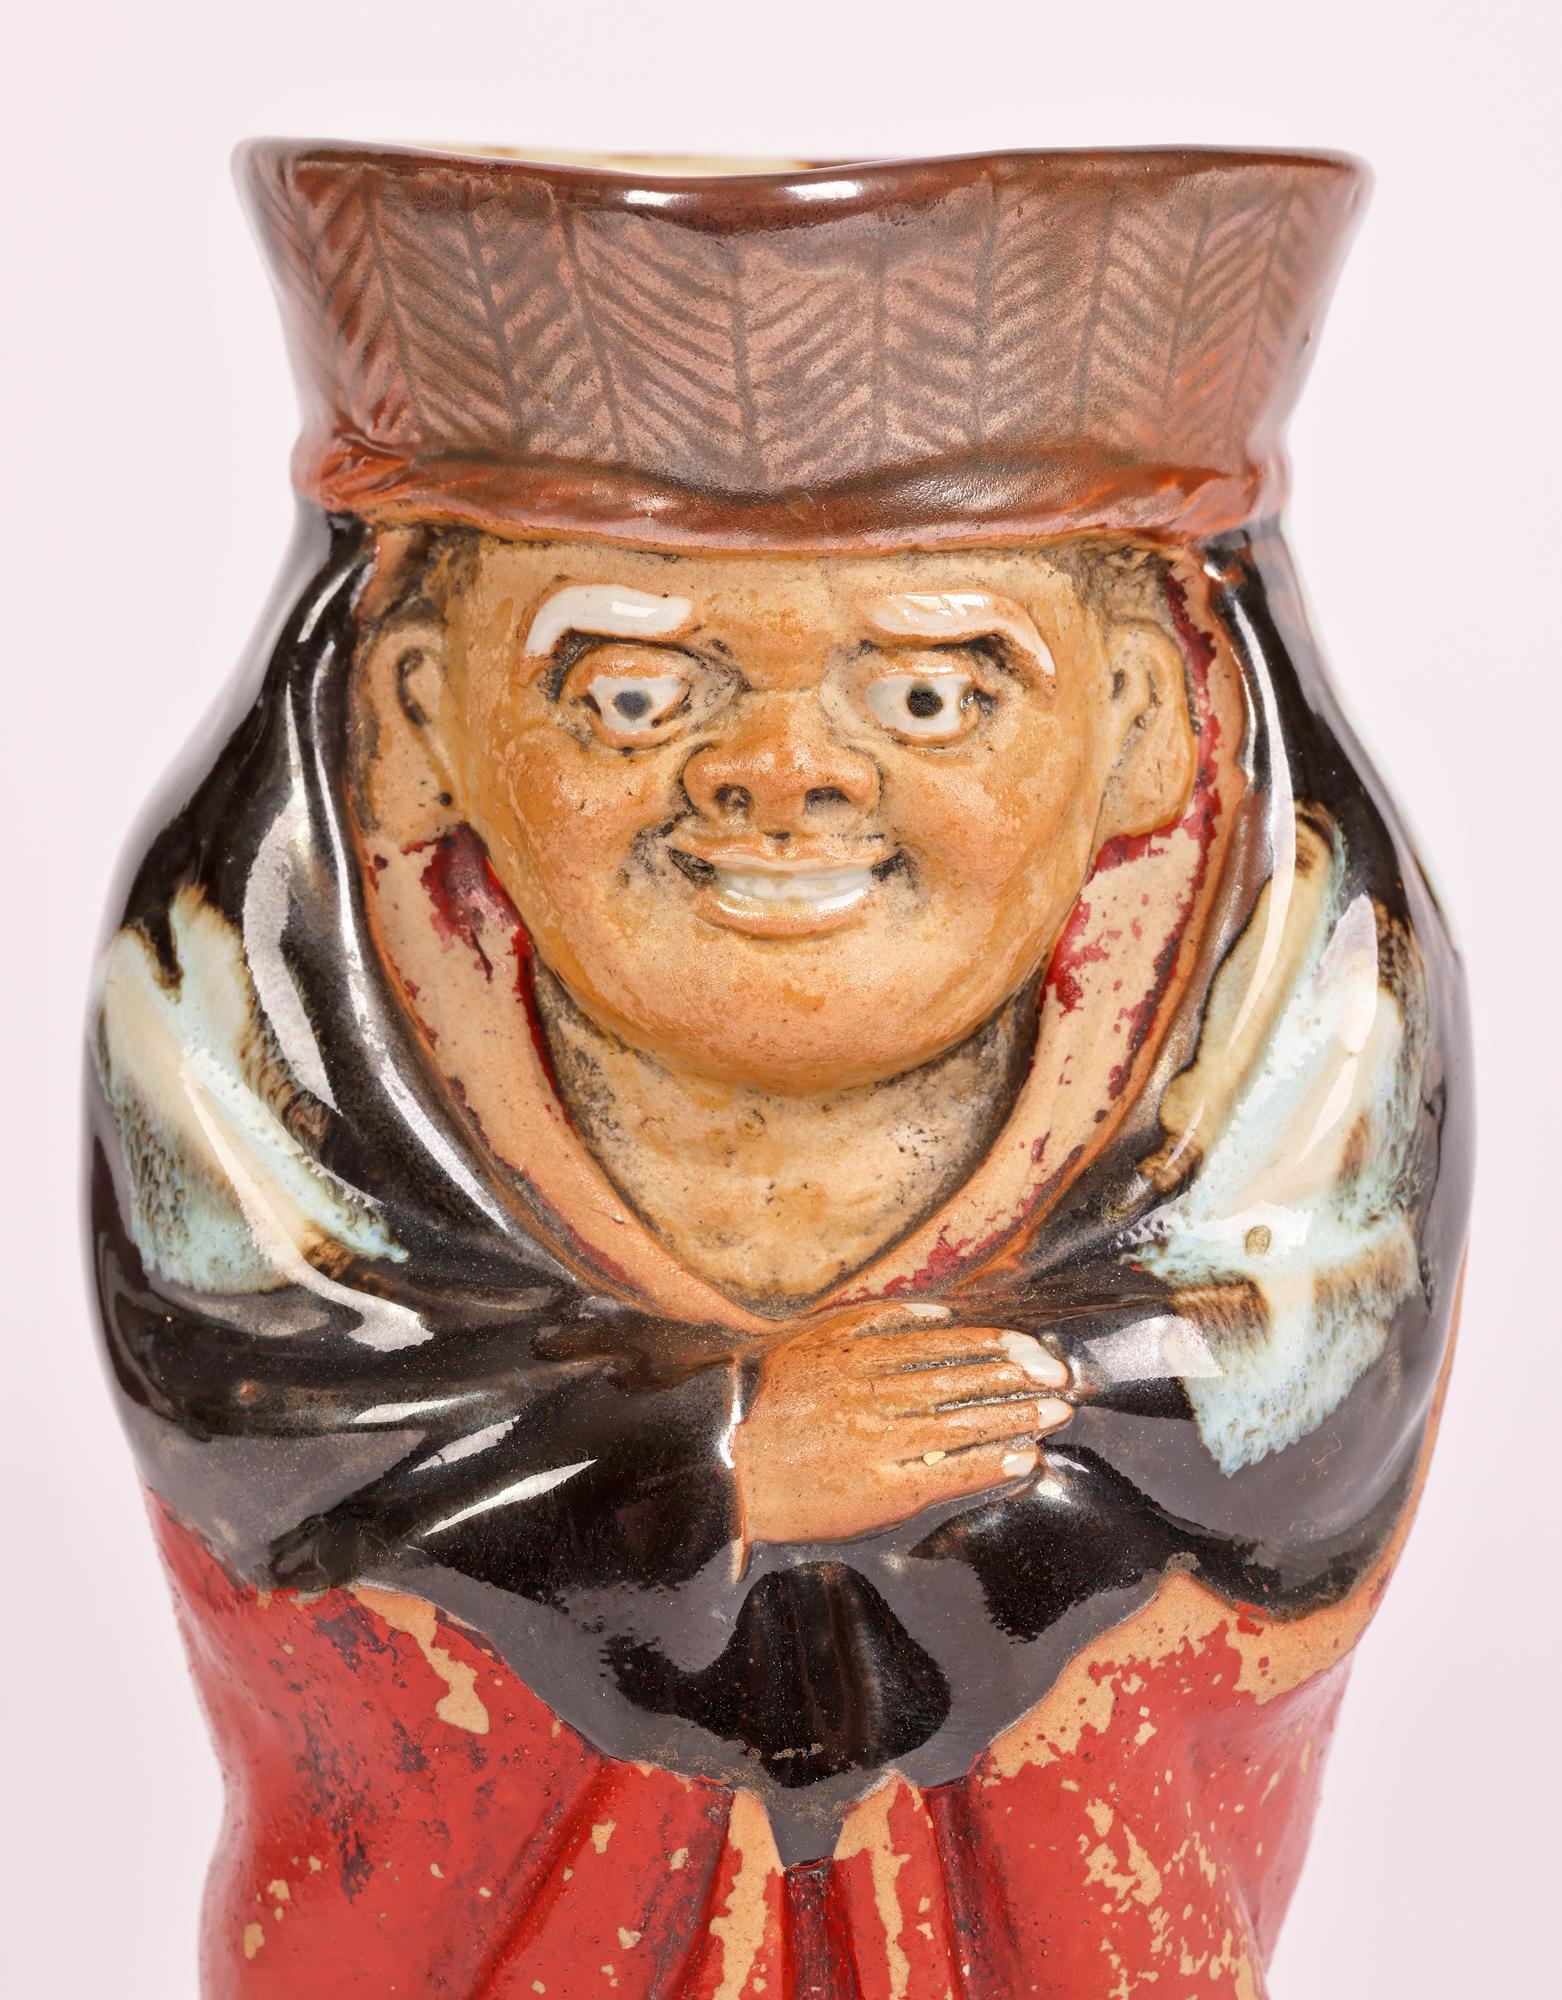 A scarce and unusual Japanese Meiji period Sumida Gawa pottery character jug by renowned potter Inoue Ryosai I (Japanese, 1828 – 1899) dating from the 19th century. 

Inoue Ryosai became independent in 1866 setting up a kiln in Imado, Asakusa and